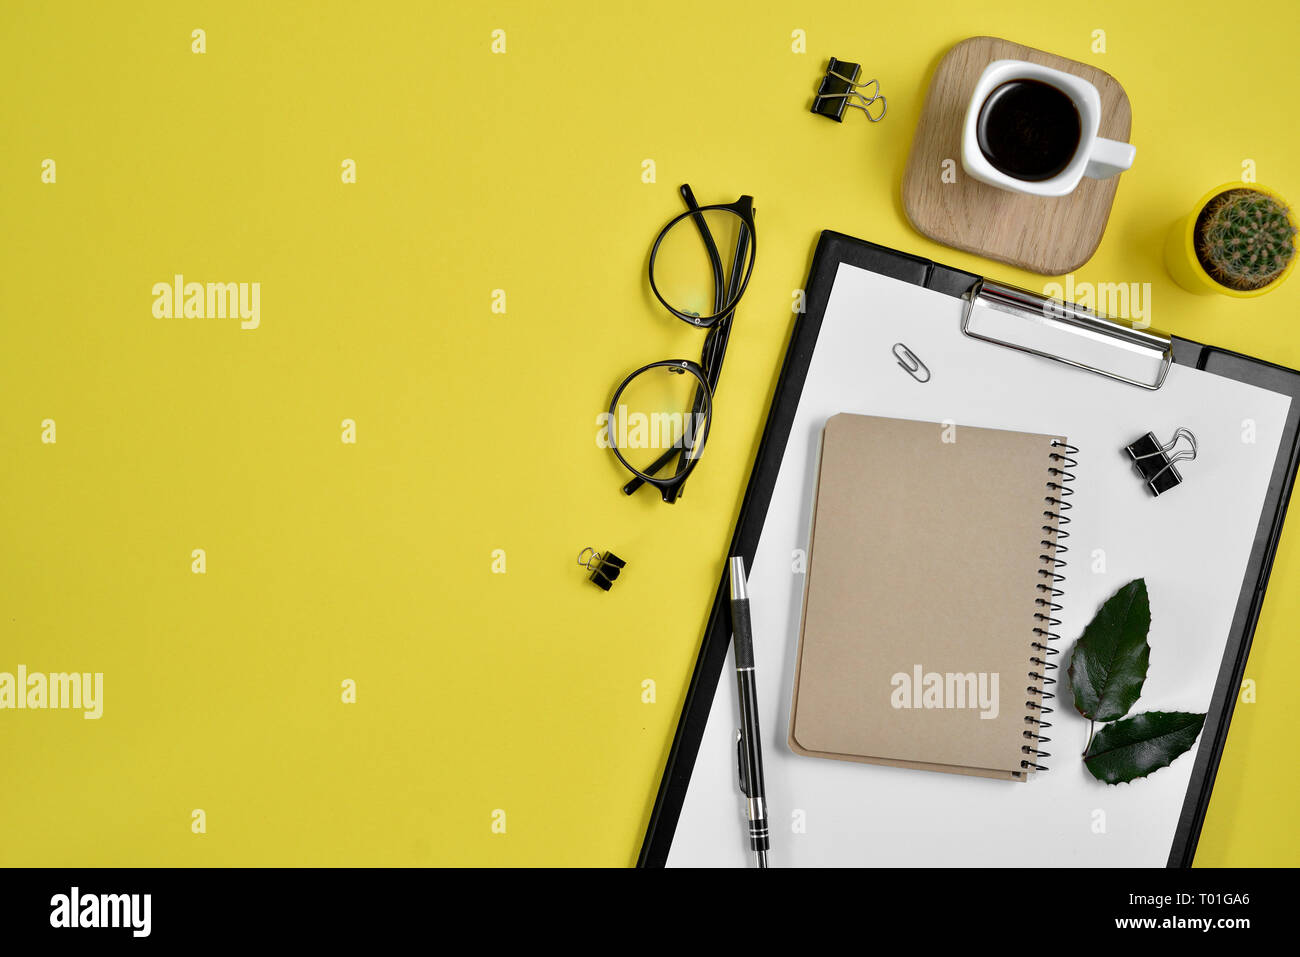 Office desk workspace with blank clip board, office supplies, pen, cactus, green leaf, coffee cup on a wooden stand and eye glasses on yellow backgrou Stock Photo